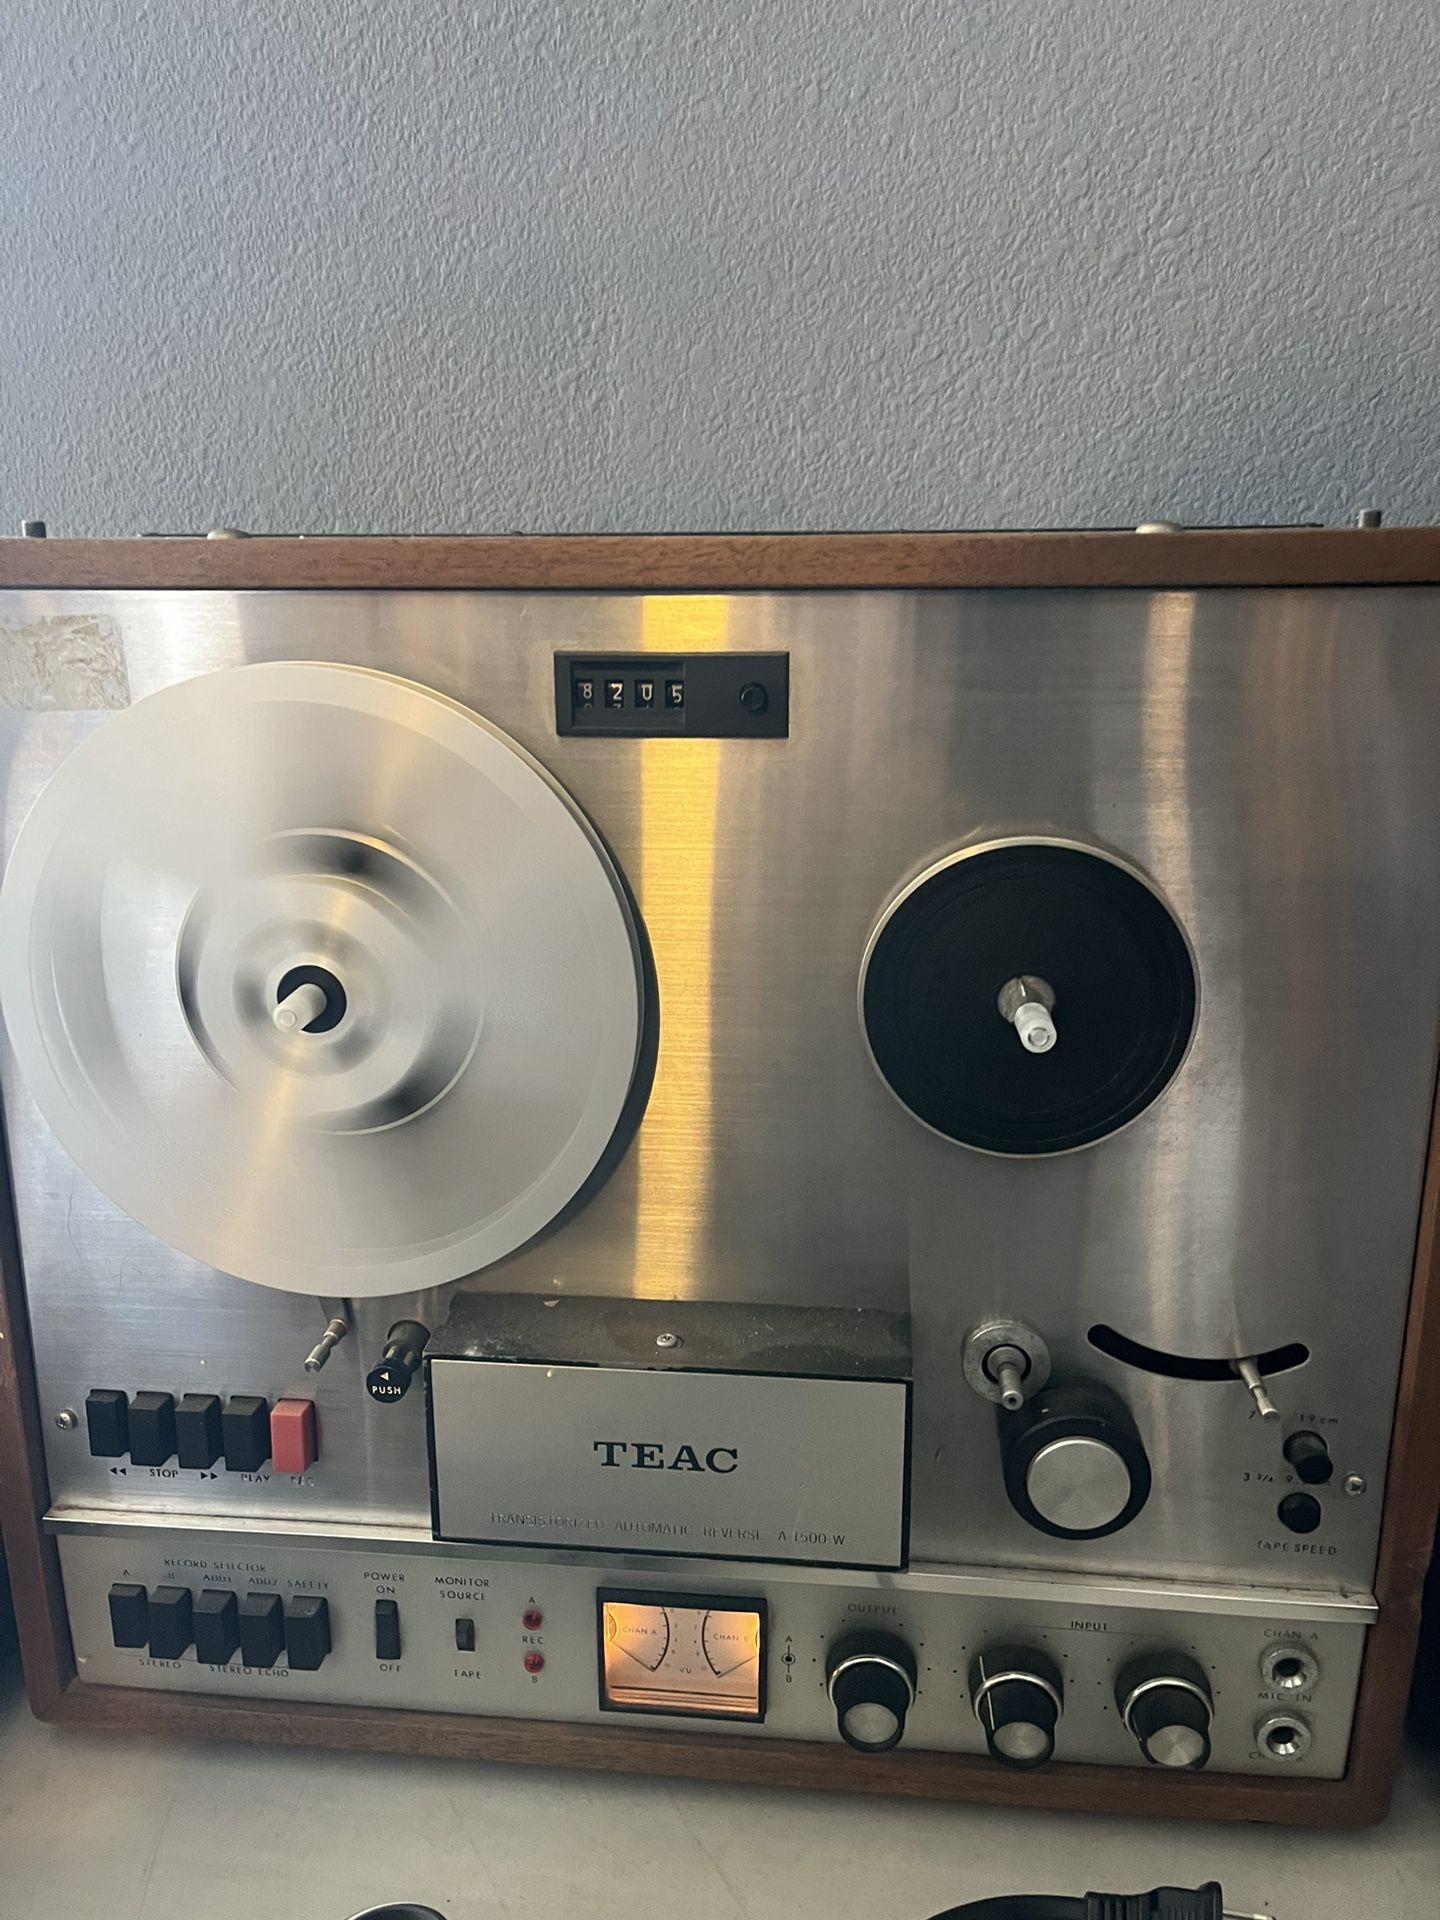 TEAC A-1500-W Stereo Reel to Reel for Sale in Fallbrook, CA - OfferUp